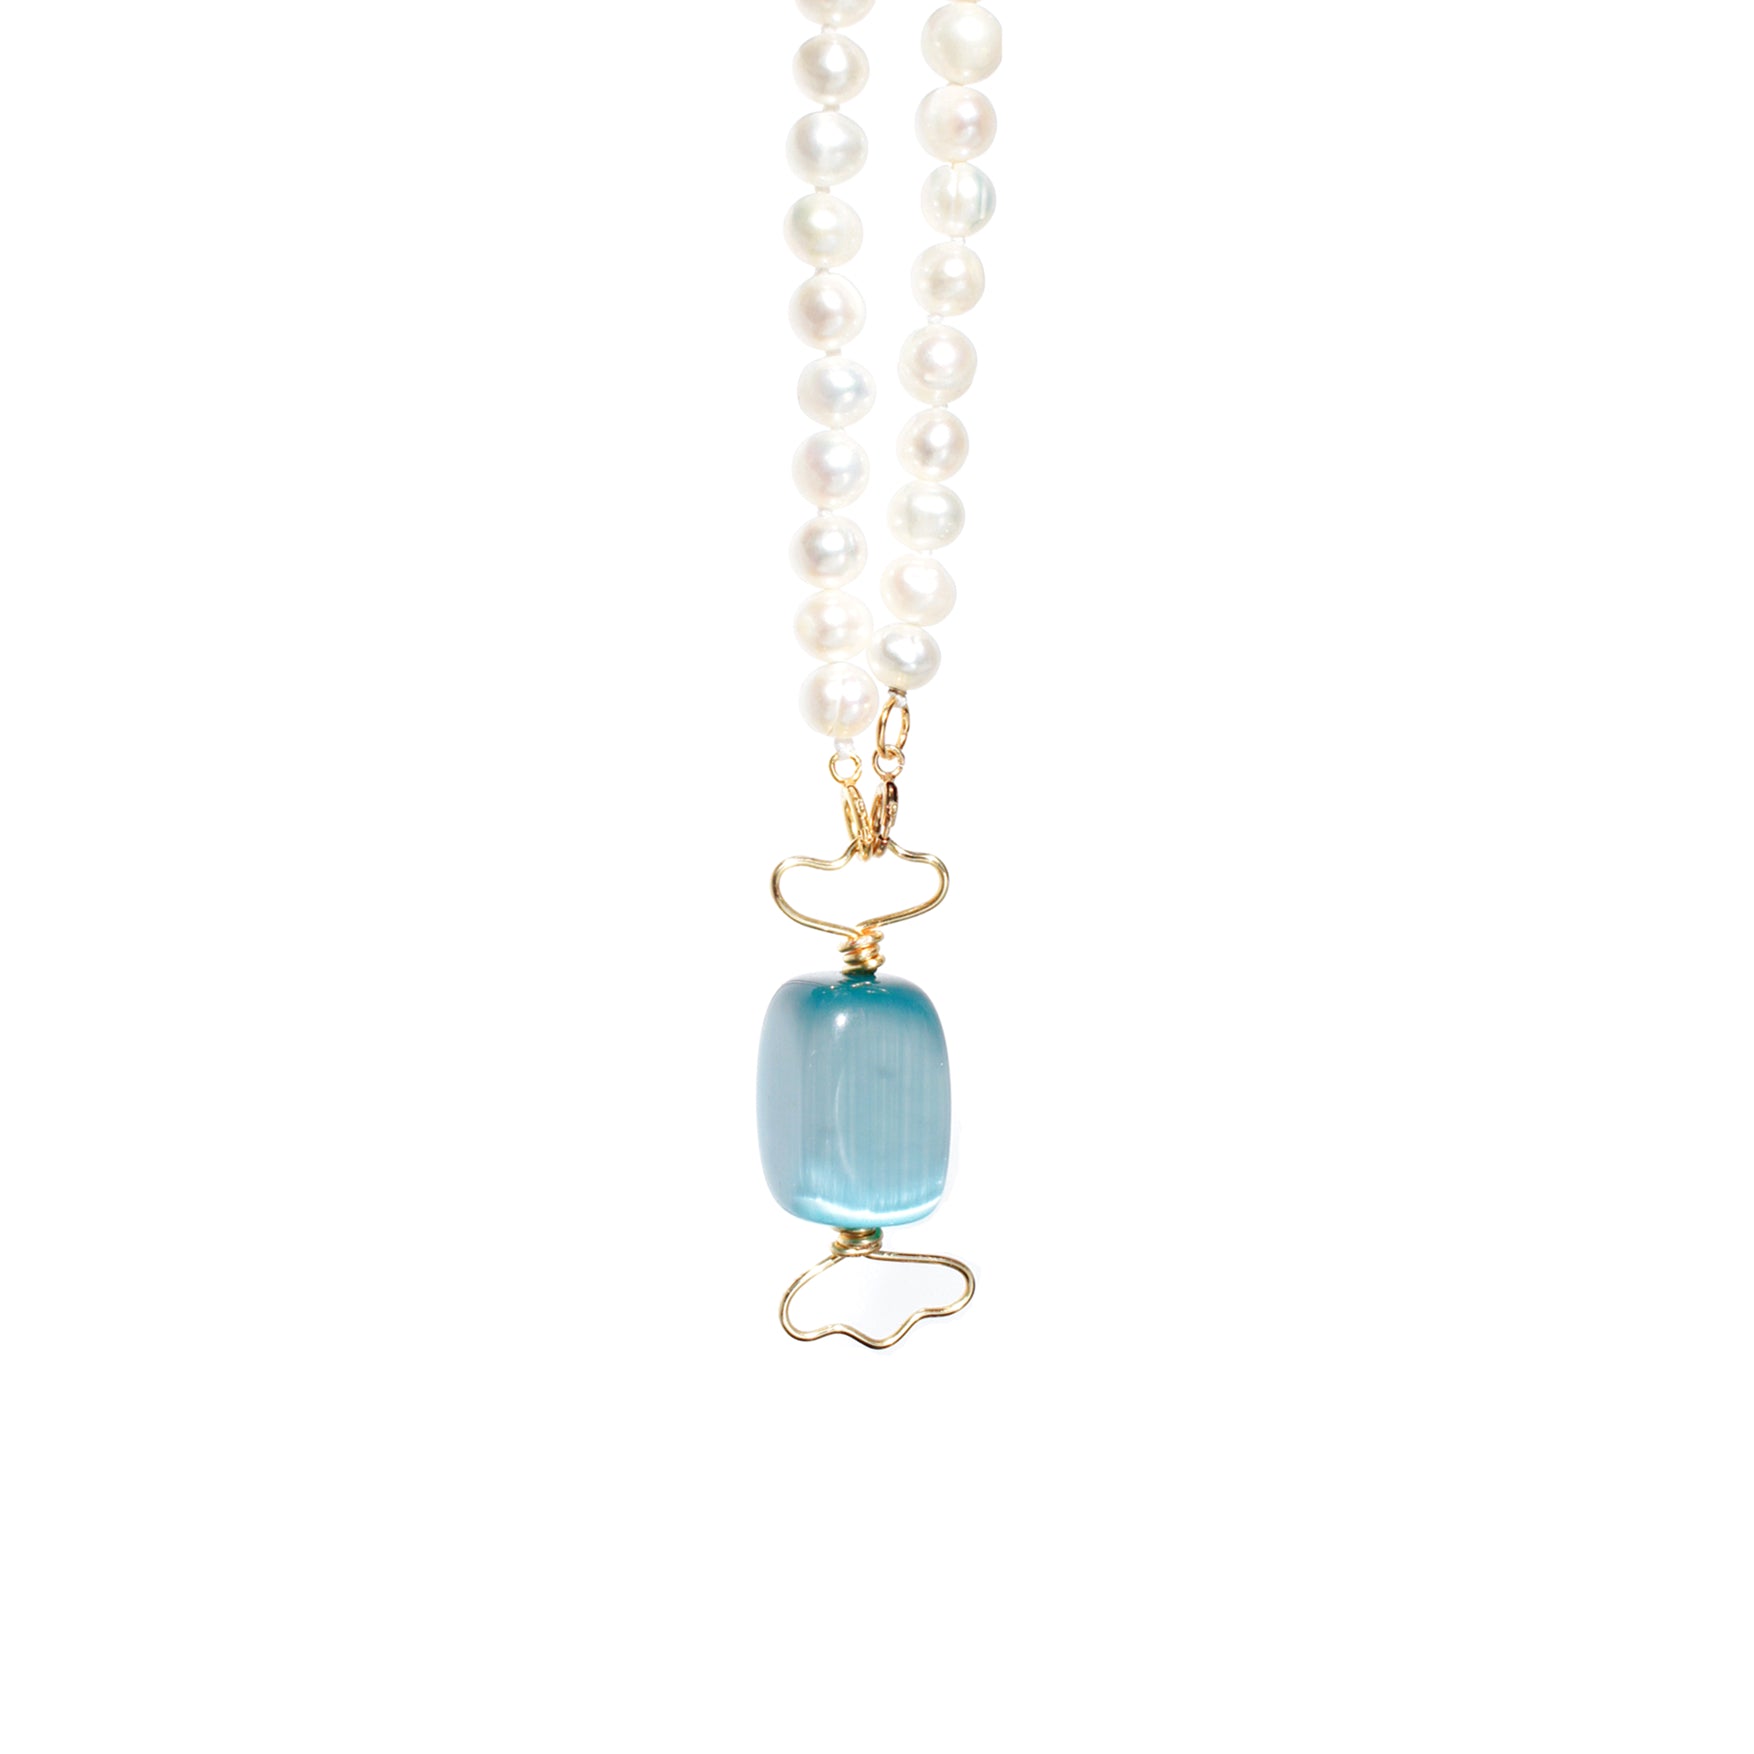 Sugar Sweet Candy and Freshwater Pearl Necklace with Detachable Pendant